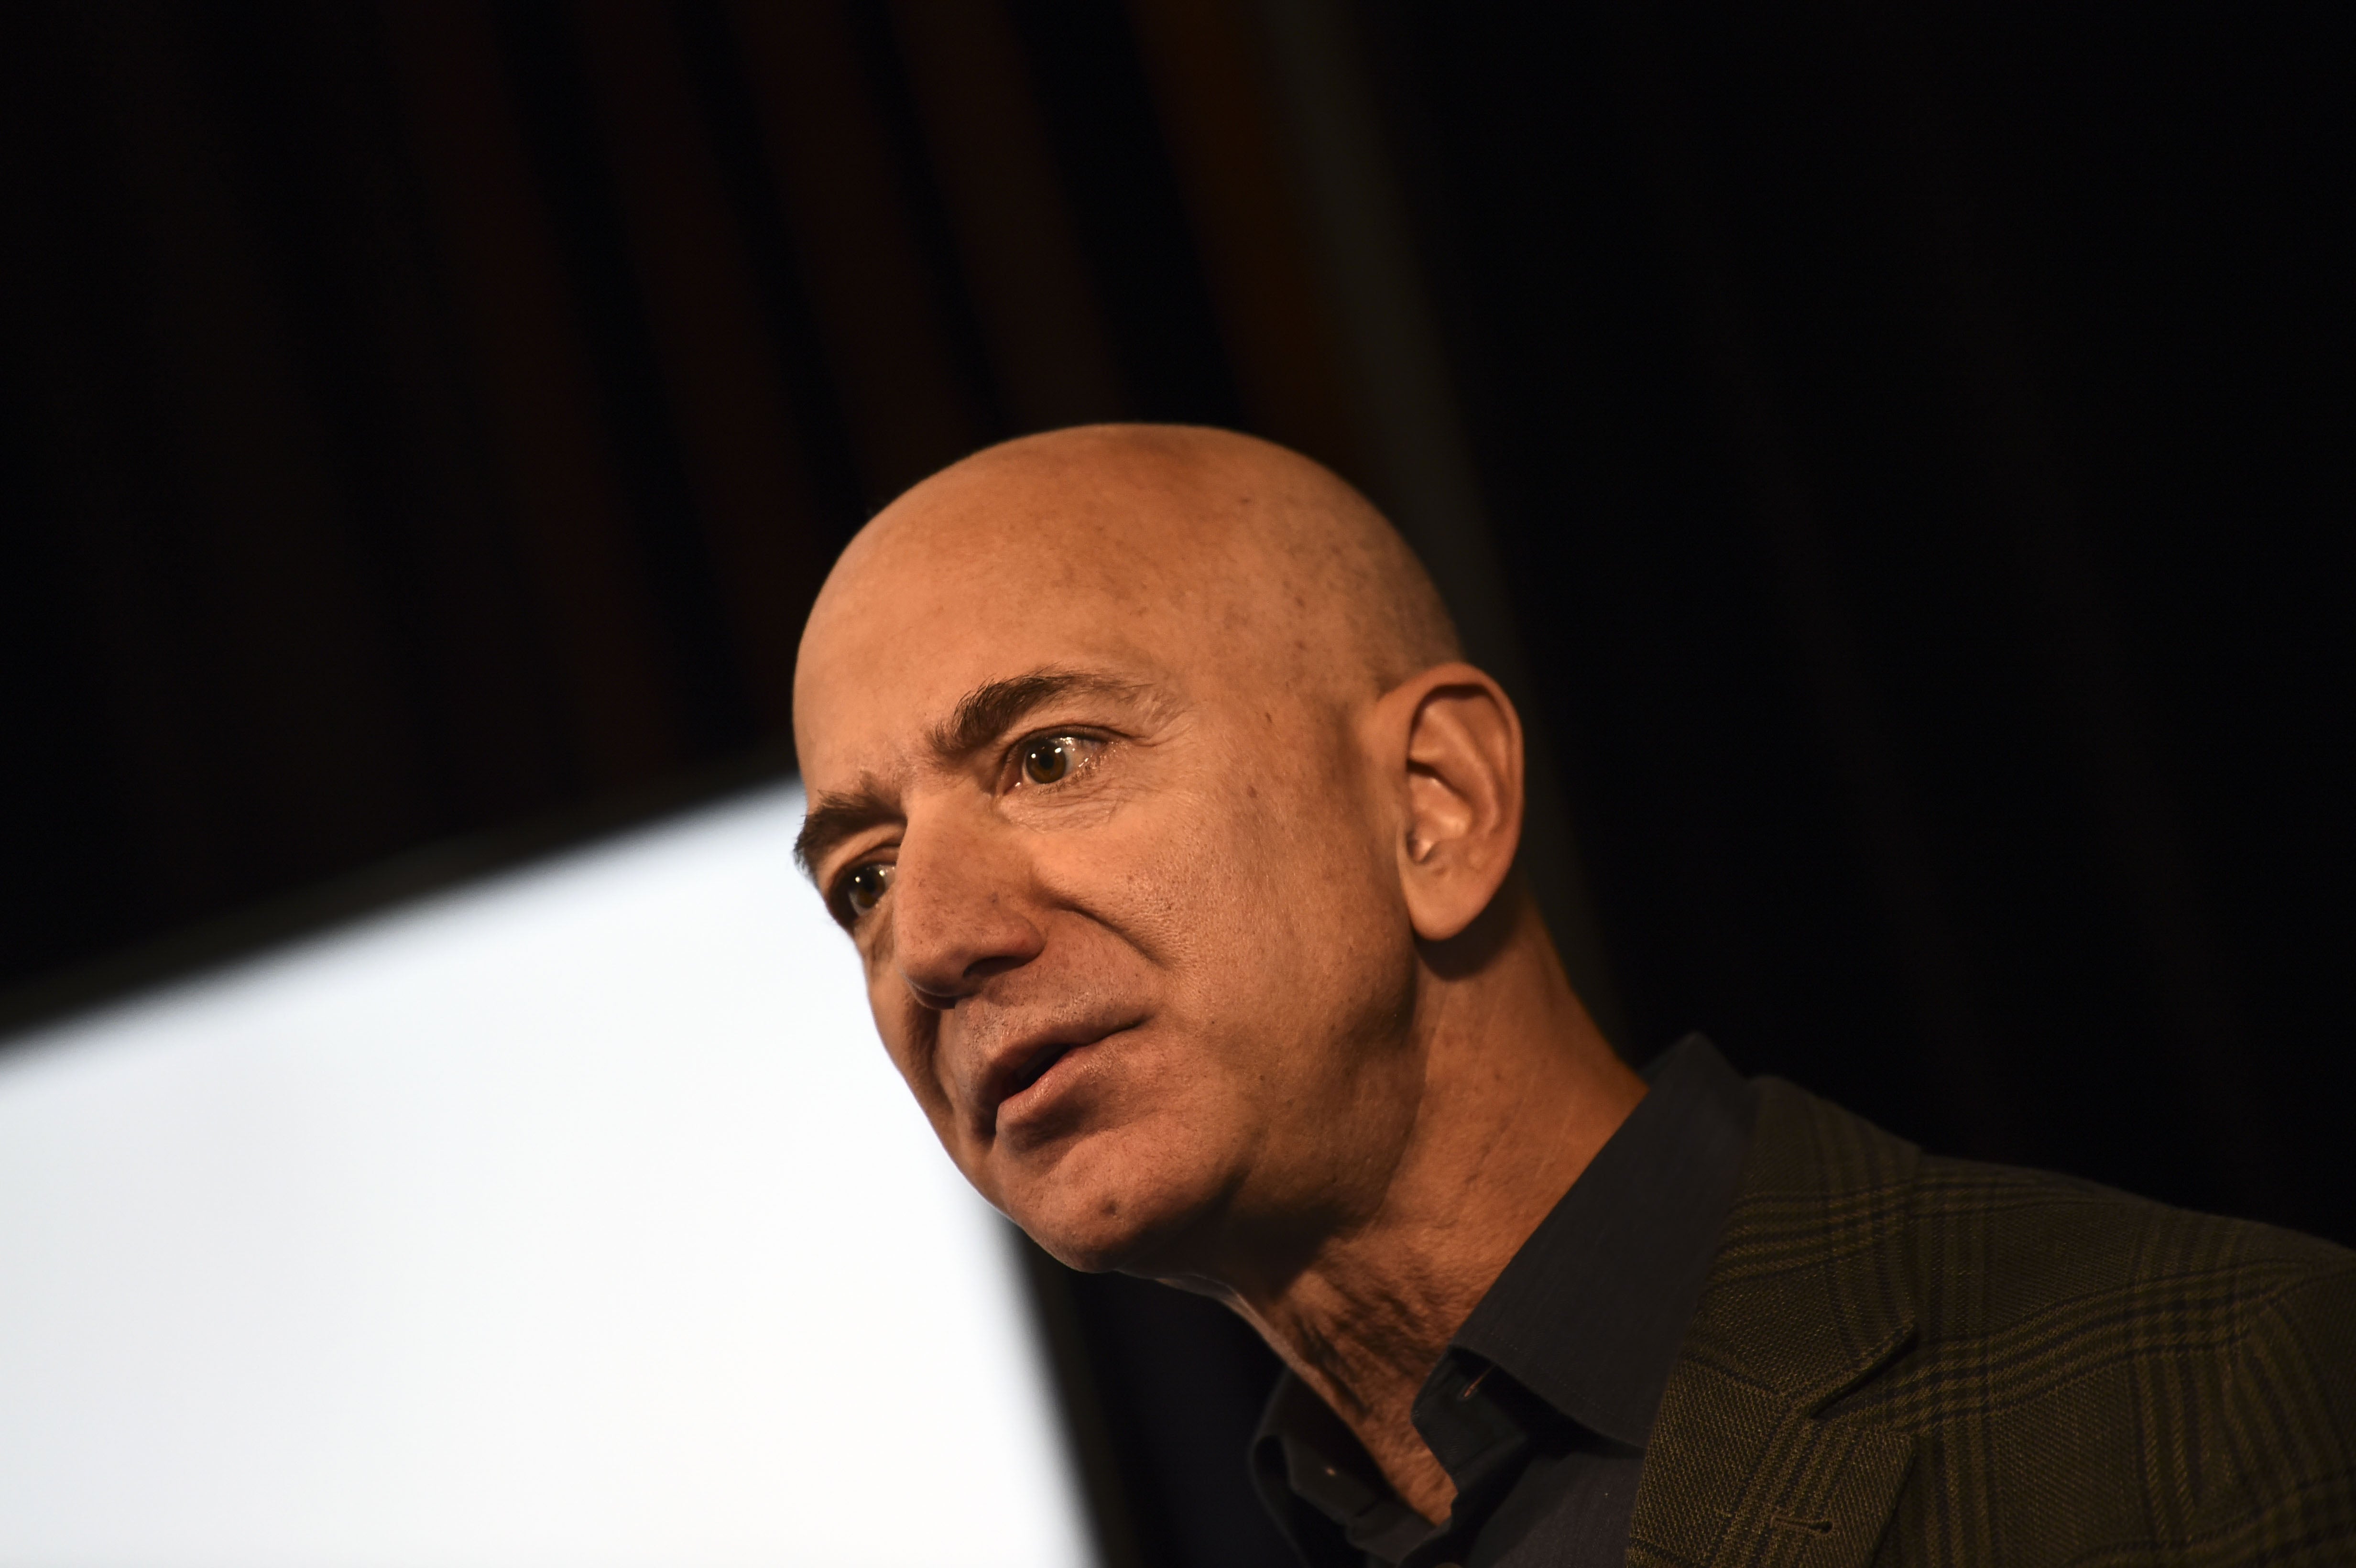 Jeff Bezos has seen his wealth rocket by $70bn since March and the start of the pandemic